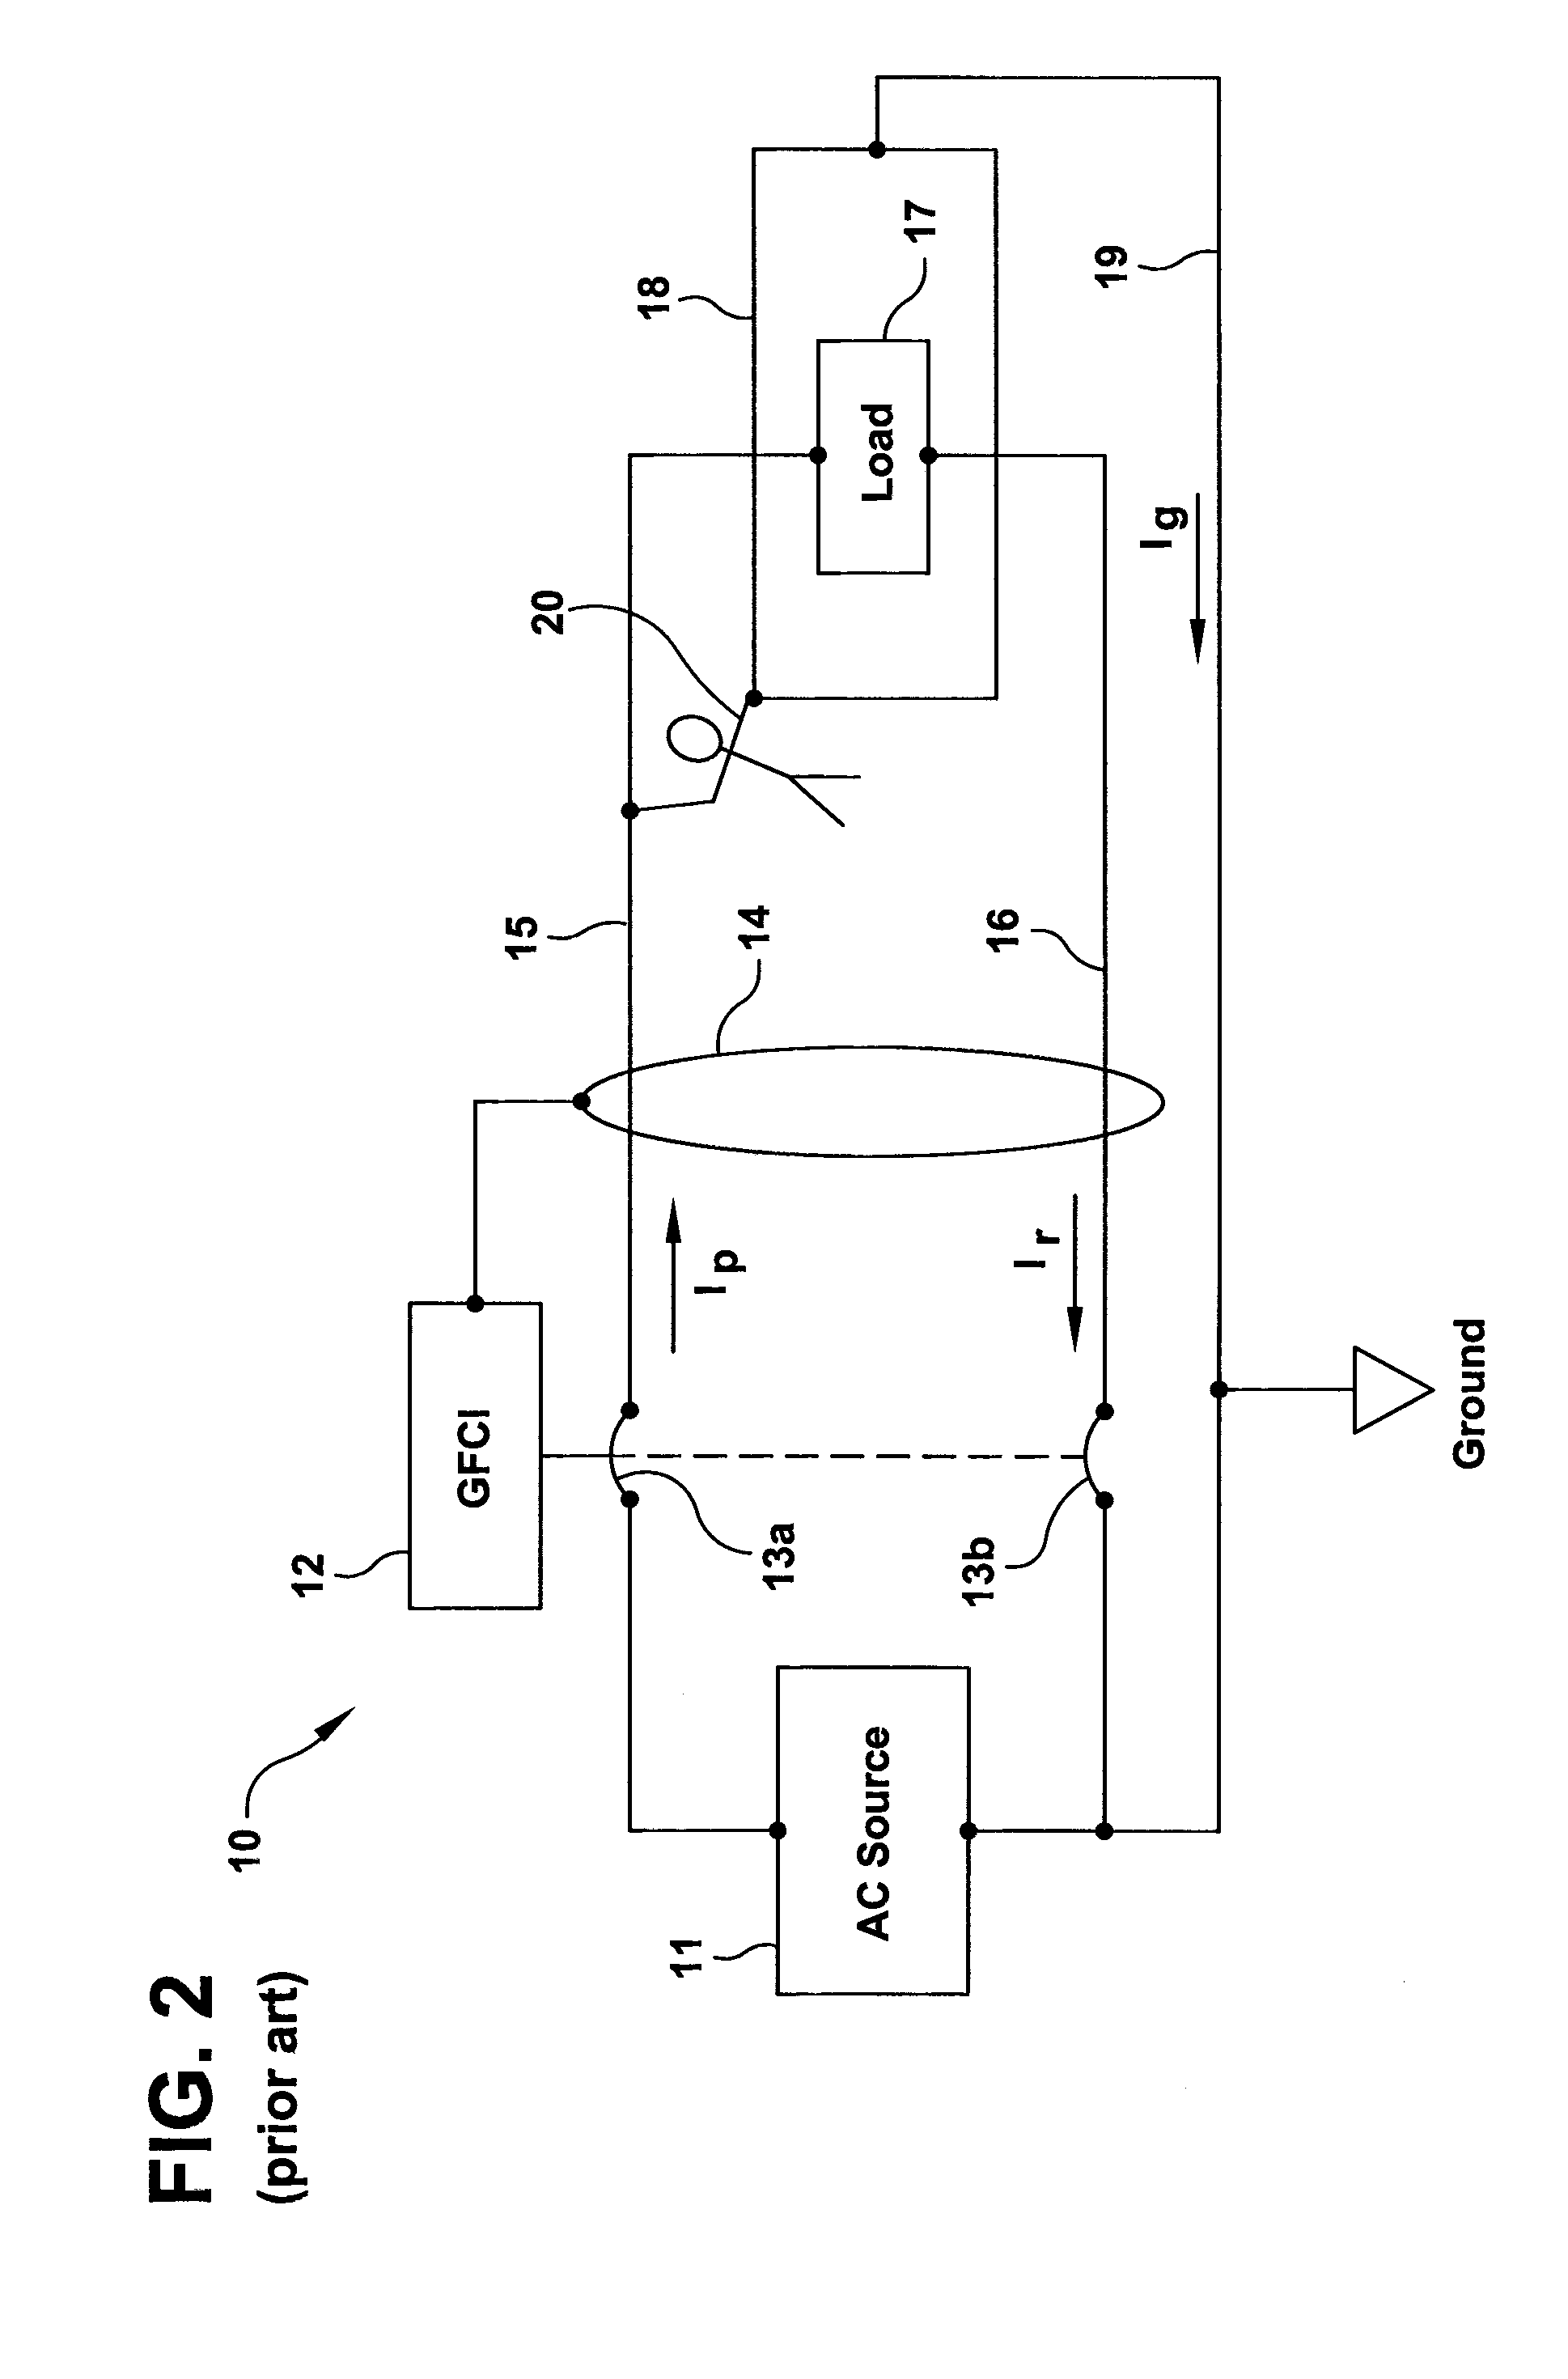 Ground fault detection device